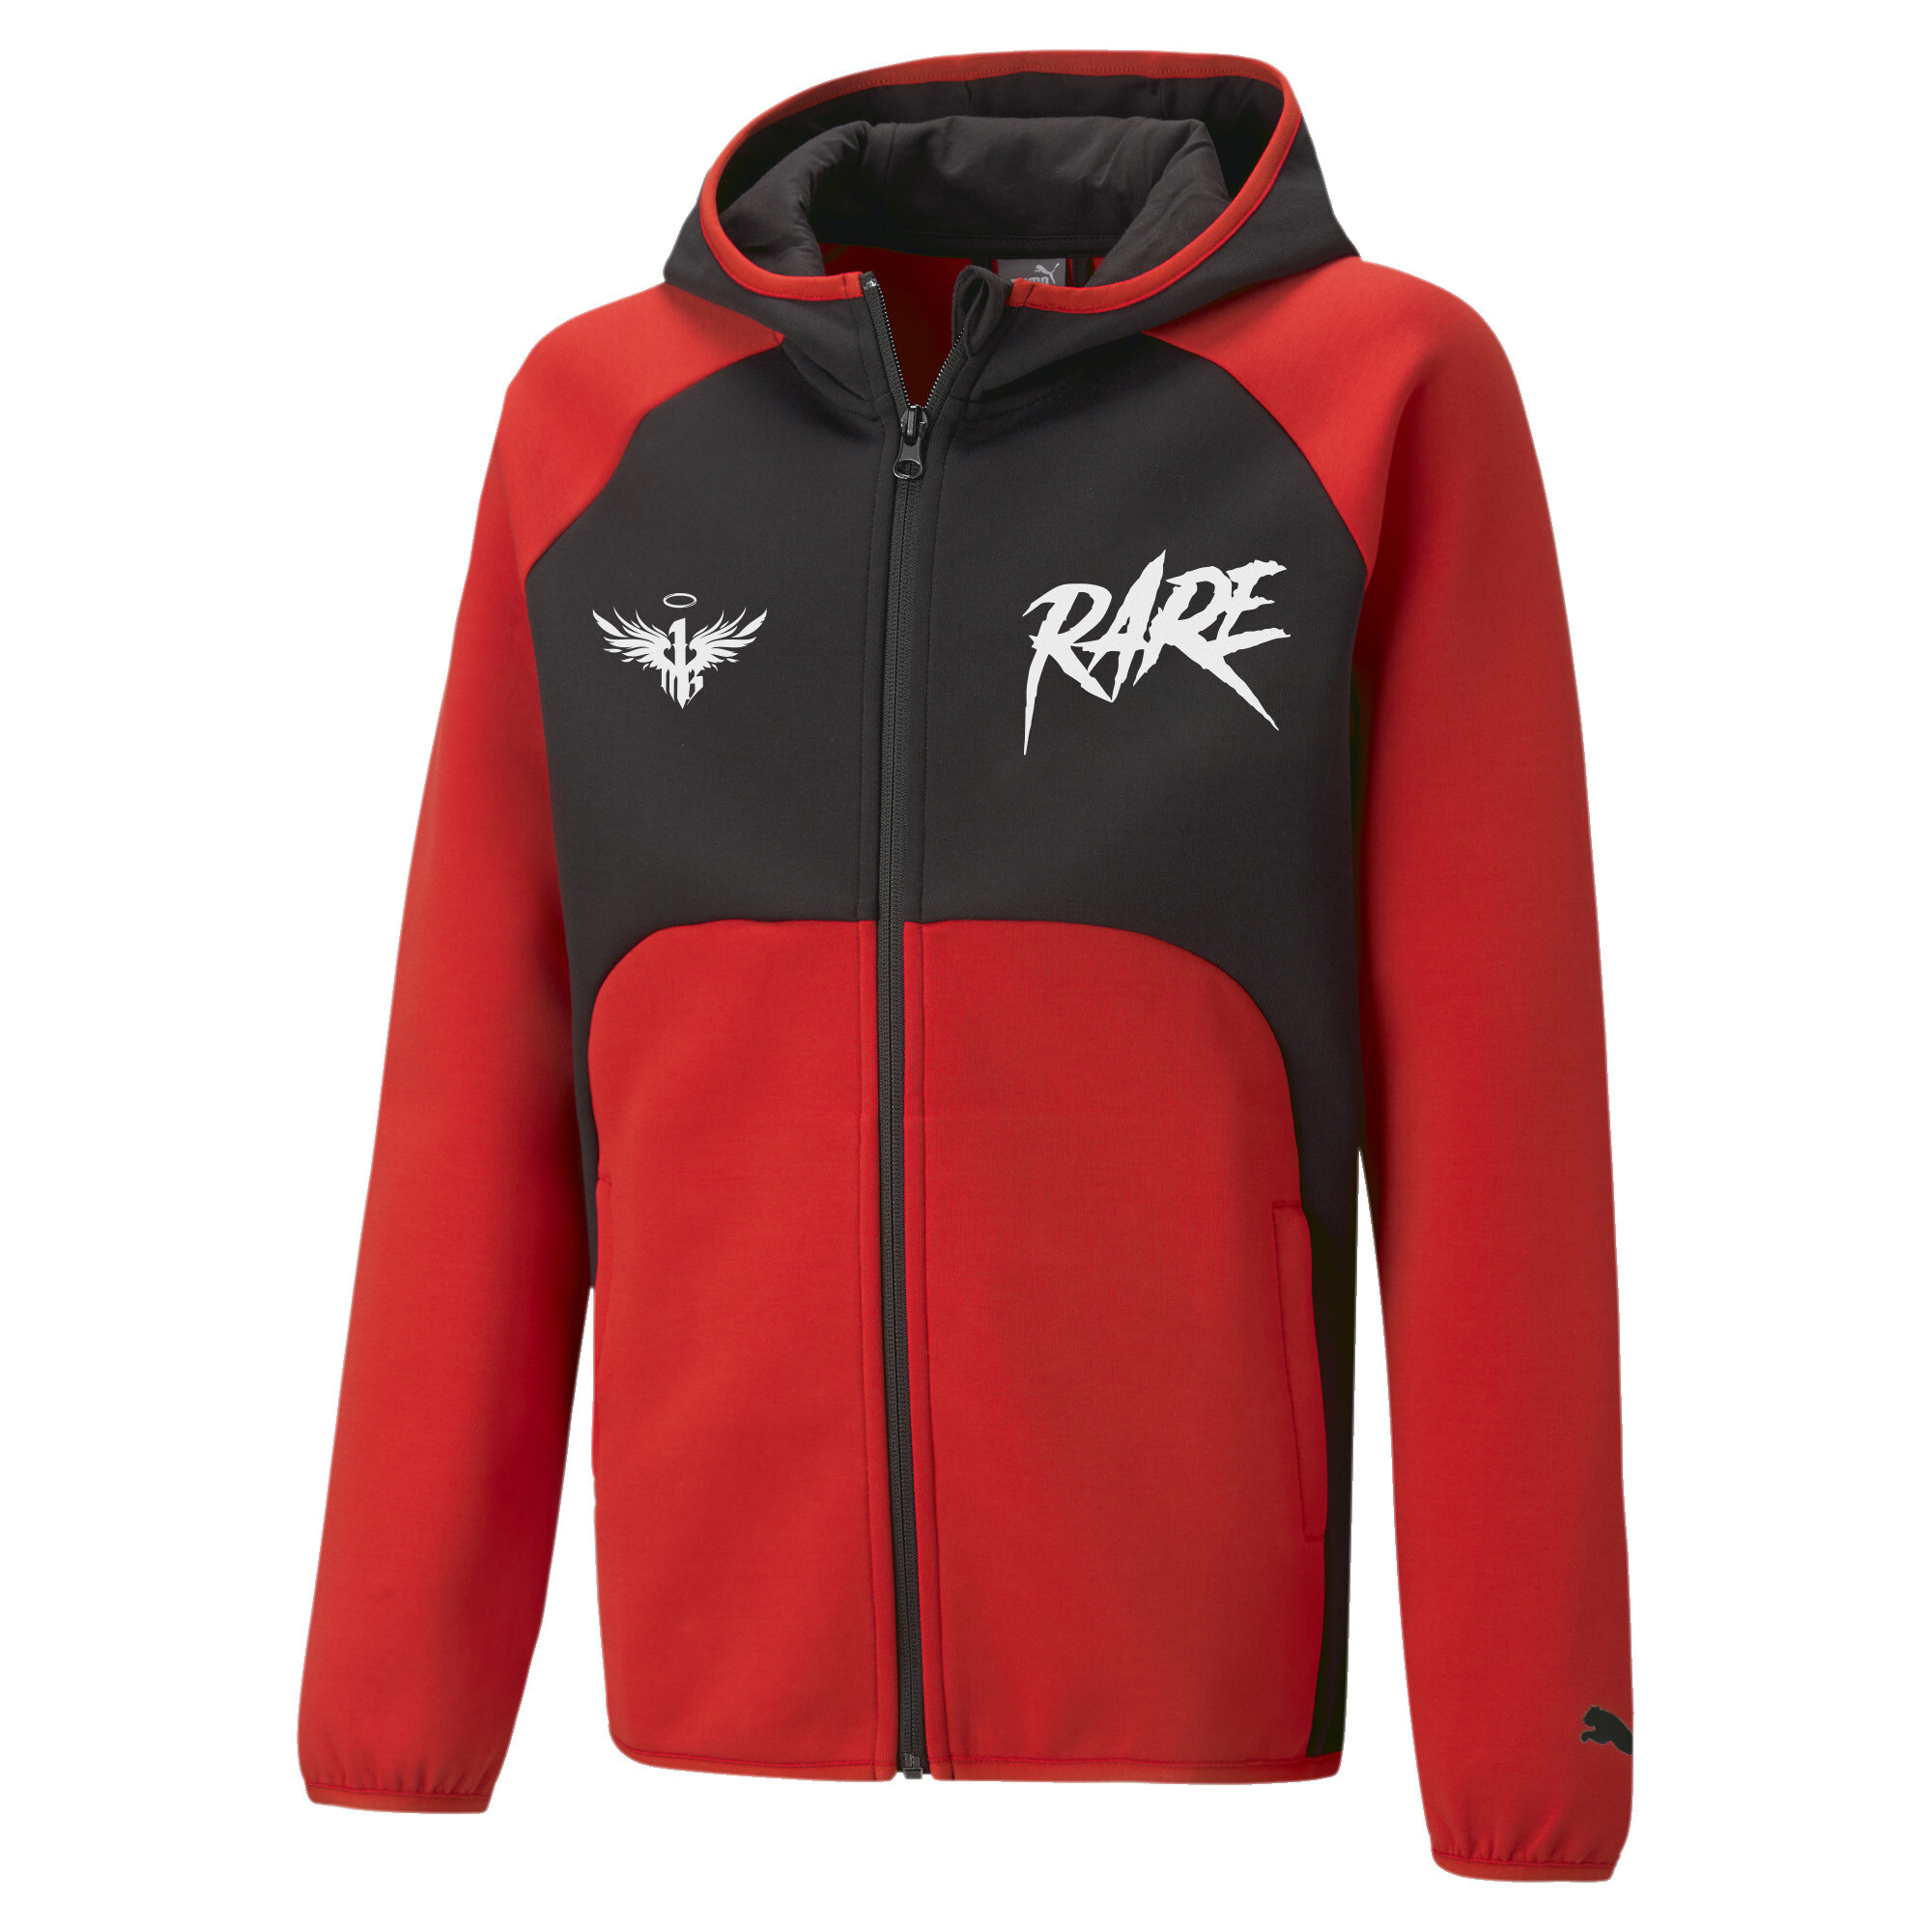 PUMA X MELO Dime Jacket In Red, Size 11-12 Youth